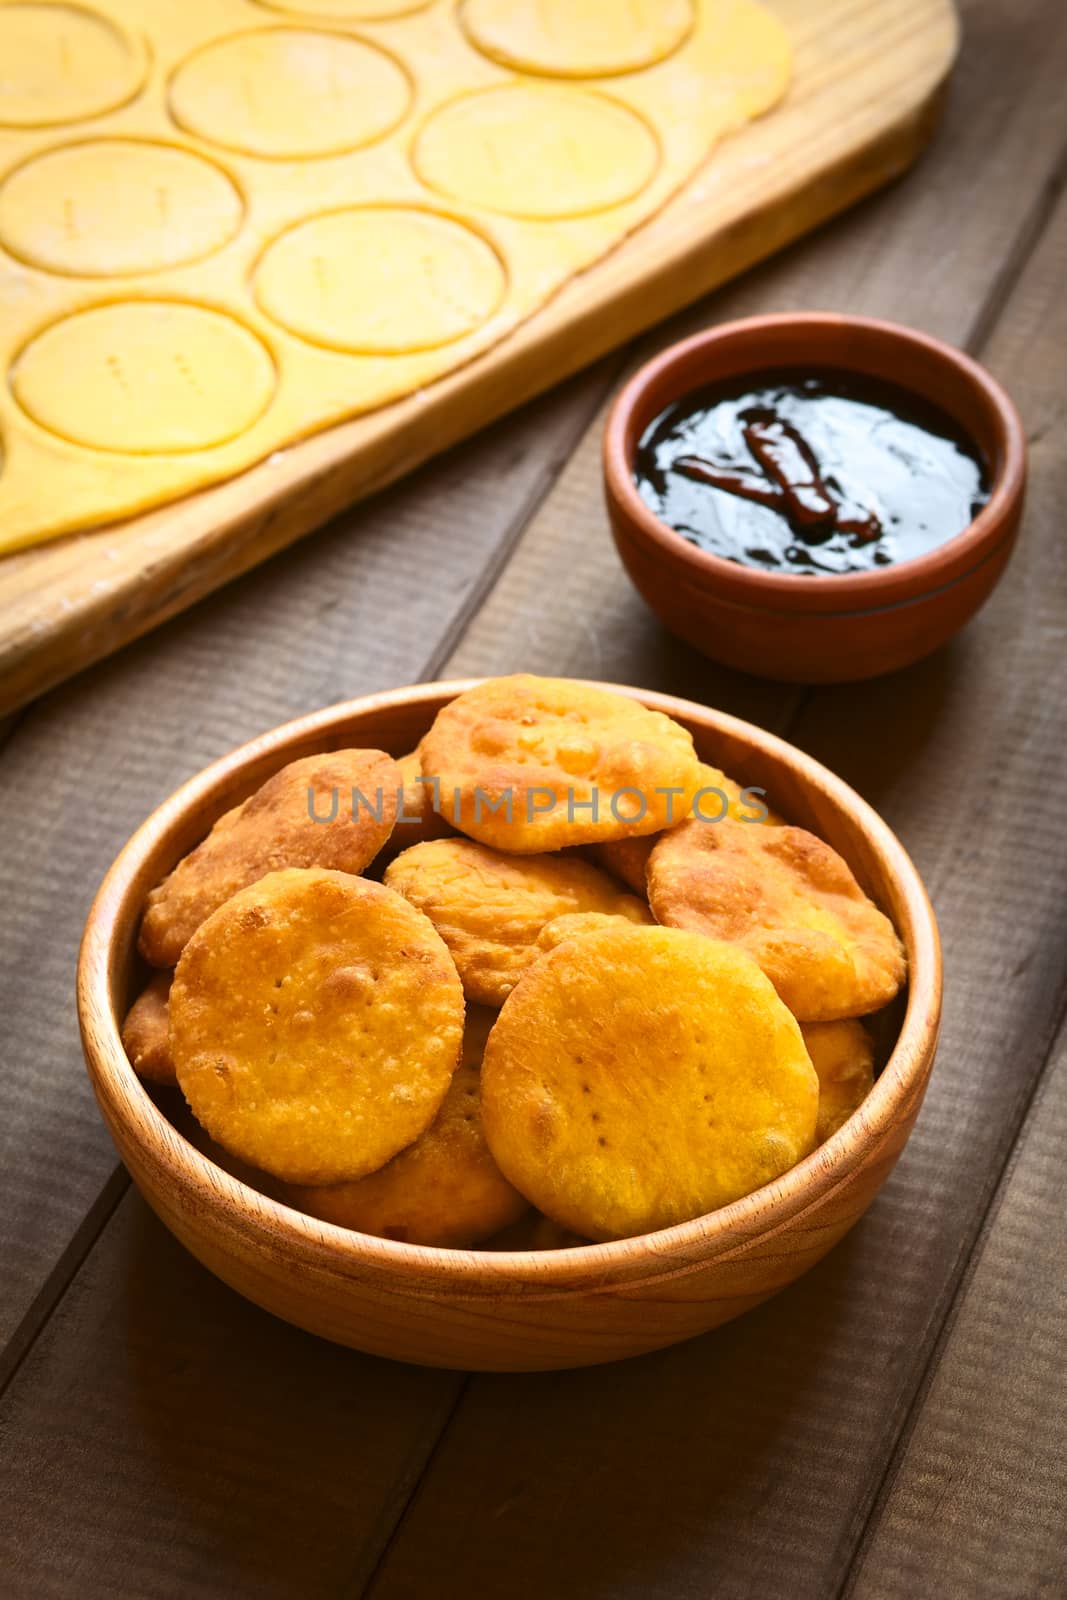 Traditional Chilean Sopaipilla fried pastry made with mashed pumpkin in the dough, served with Chancaca sweet sauce, photographed on wood with natural light (Selective Focus, Focus on the first two sopaipillas)